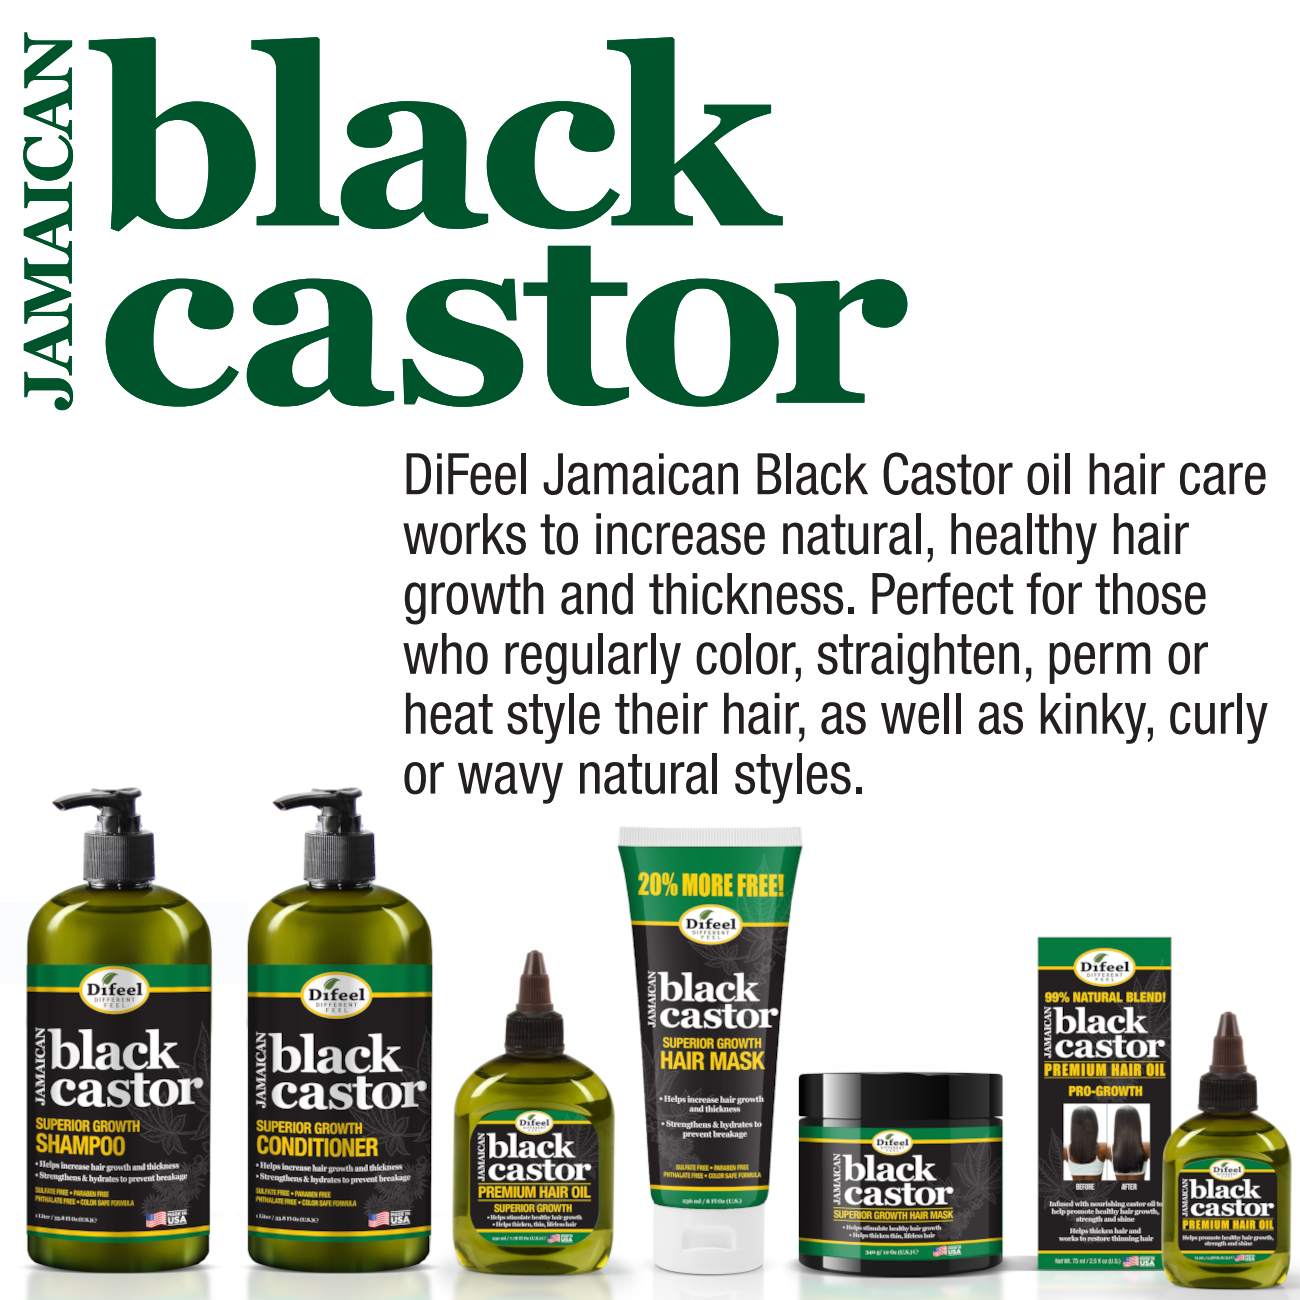 Difeel Superior Growth Jamaican Black Castor Shampoo & Conditioner Gift Set 4-PC Boxed Hair Care Collection